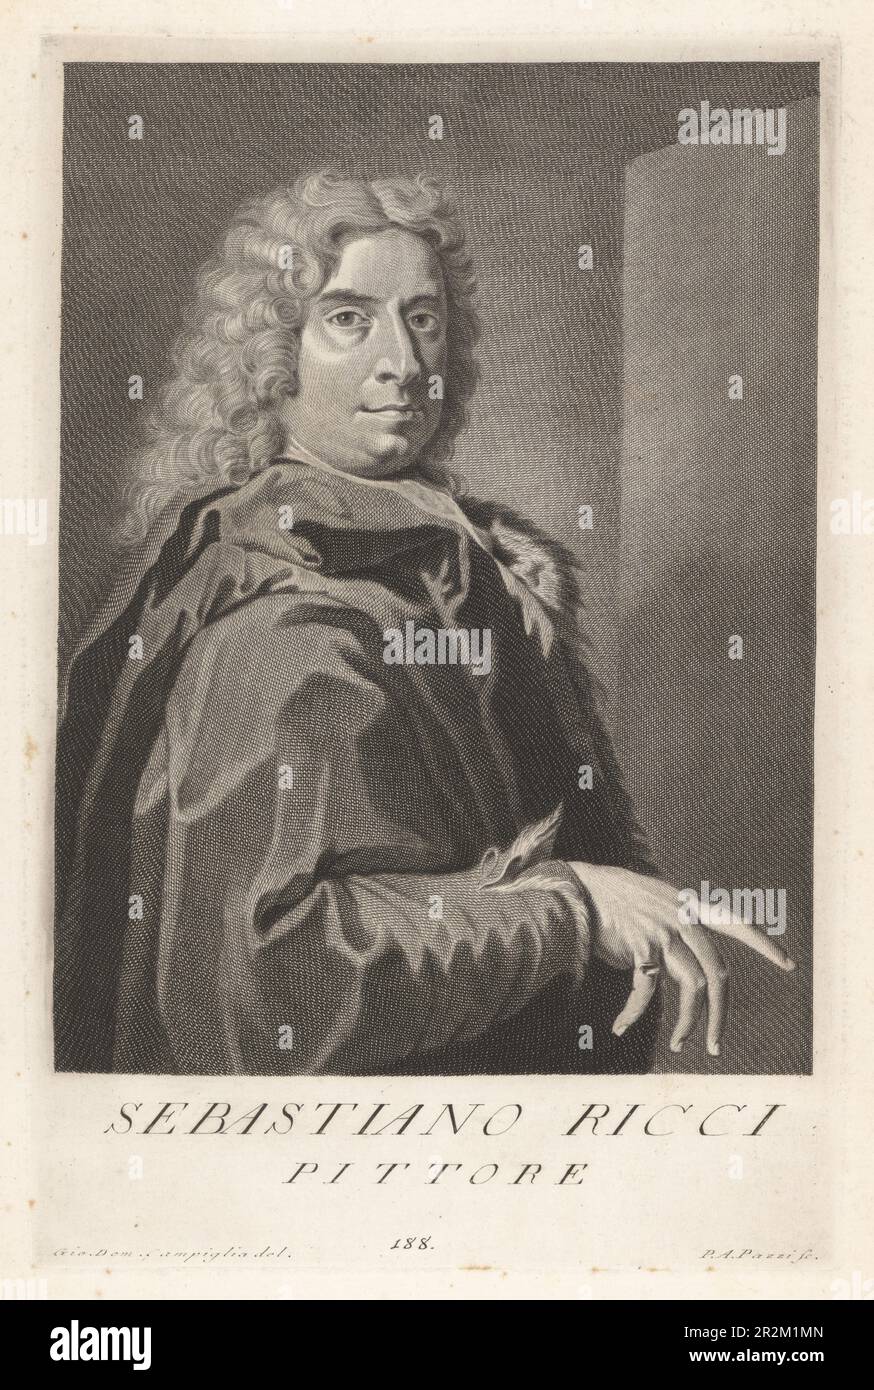 Sebastiano Ricci, Italian painter of the late Baroque school of Venice, 1659-1734. Late Cortonesque style of grand manner fresco painting. Pittore. Copperplate engraving by Pietro Antonio Pazzi after Giovanni Domenico Campiglia after a self portrait by the artist from Francesco Moucke's Museo Florentino (Museum Florentinum), Serie di Ritratti de Pittori (Series of Portraits of Painters) stamperia Mouckiana, Florence, 1752-62. Stock Photo